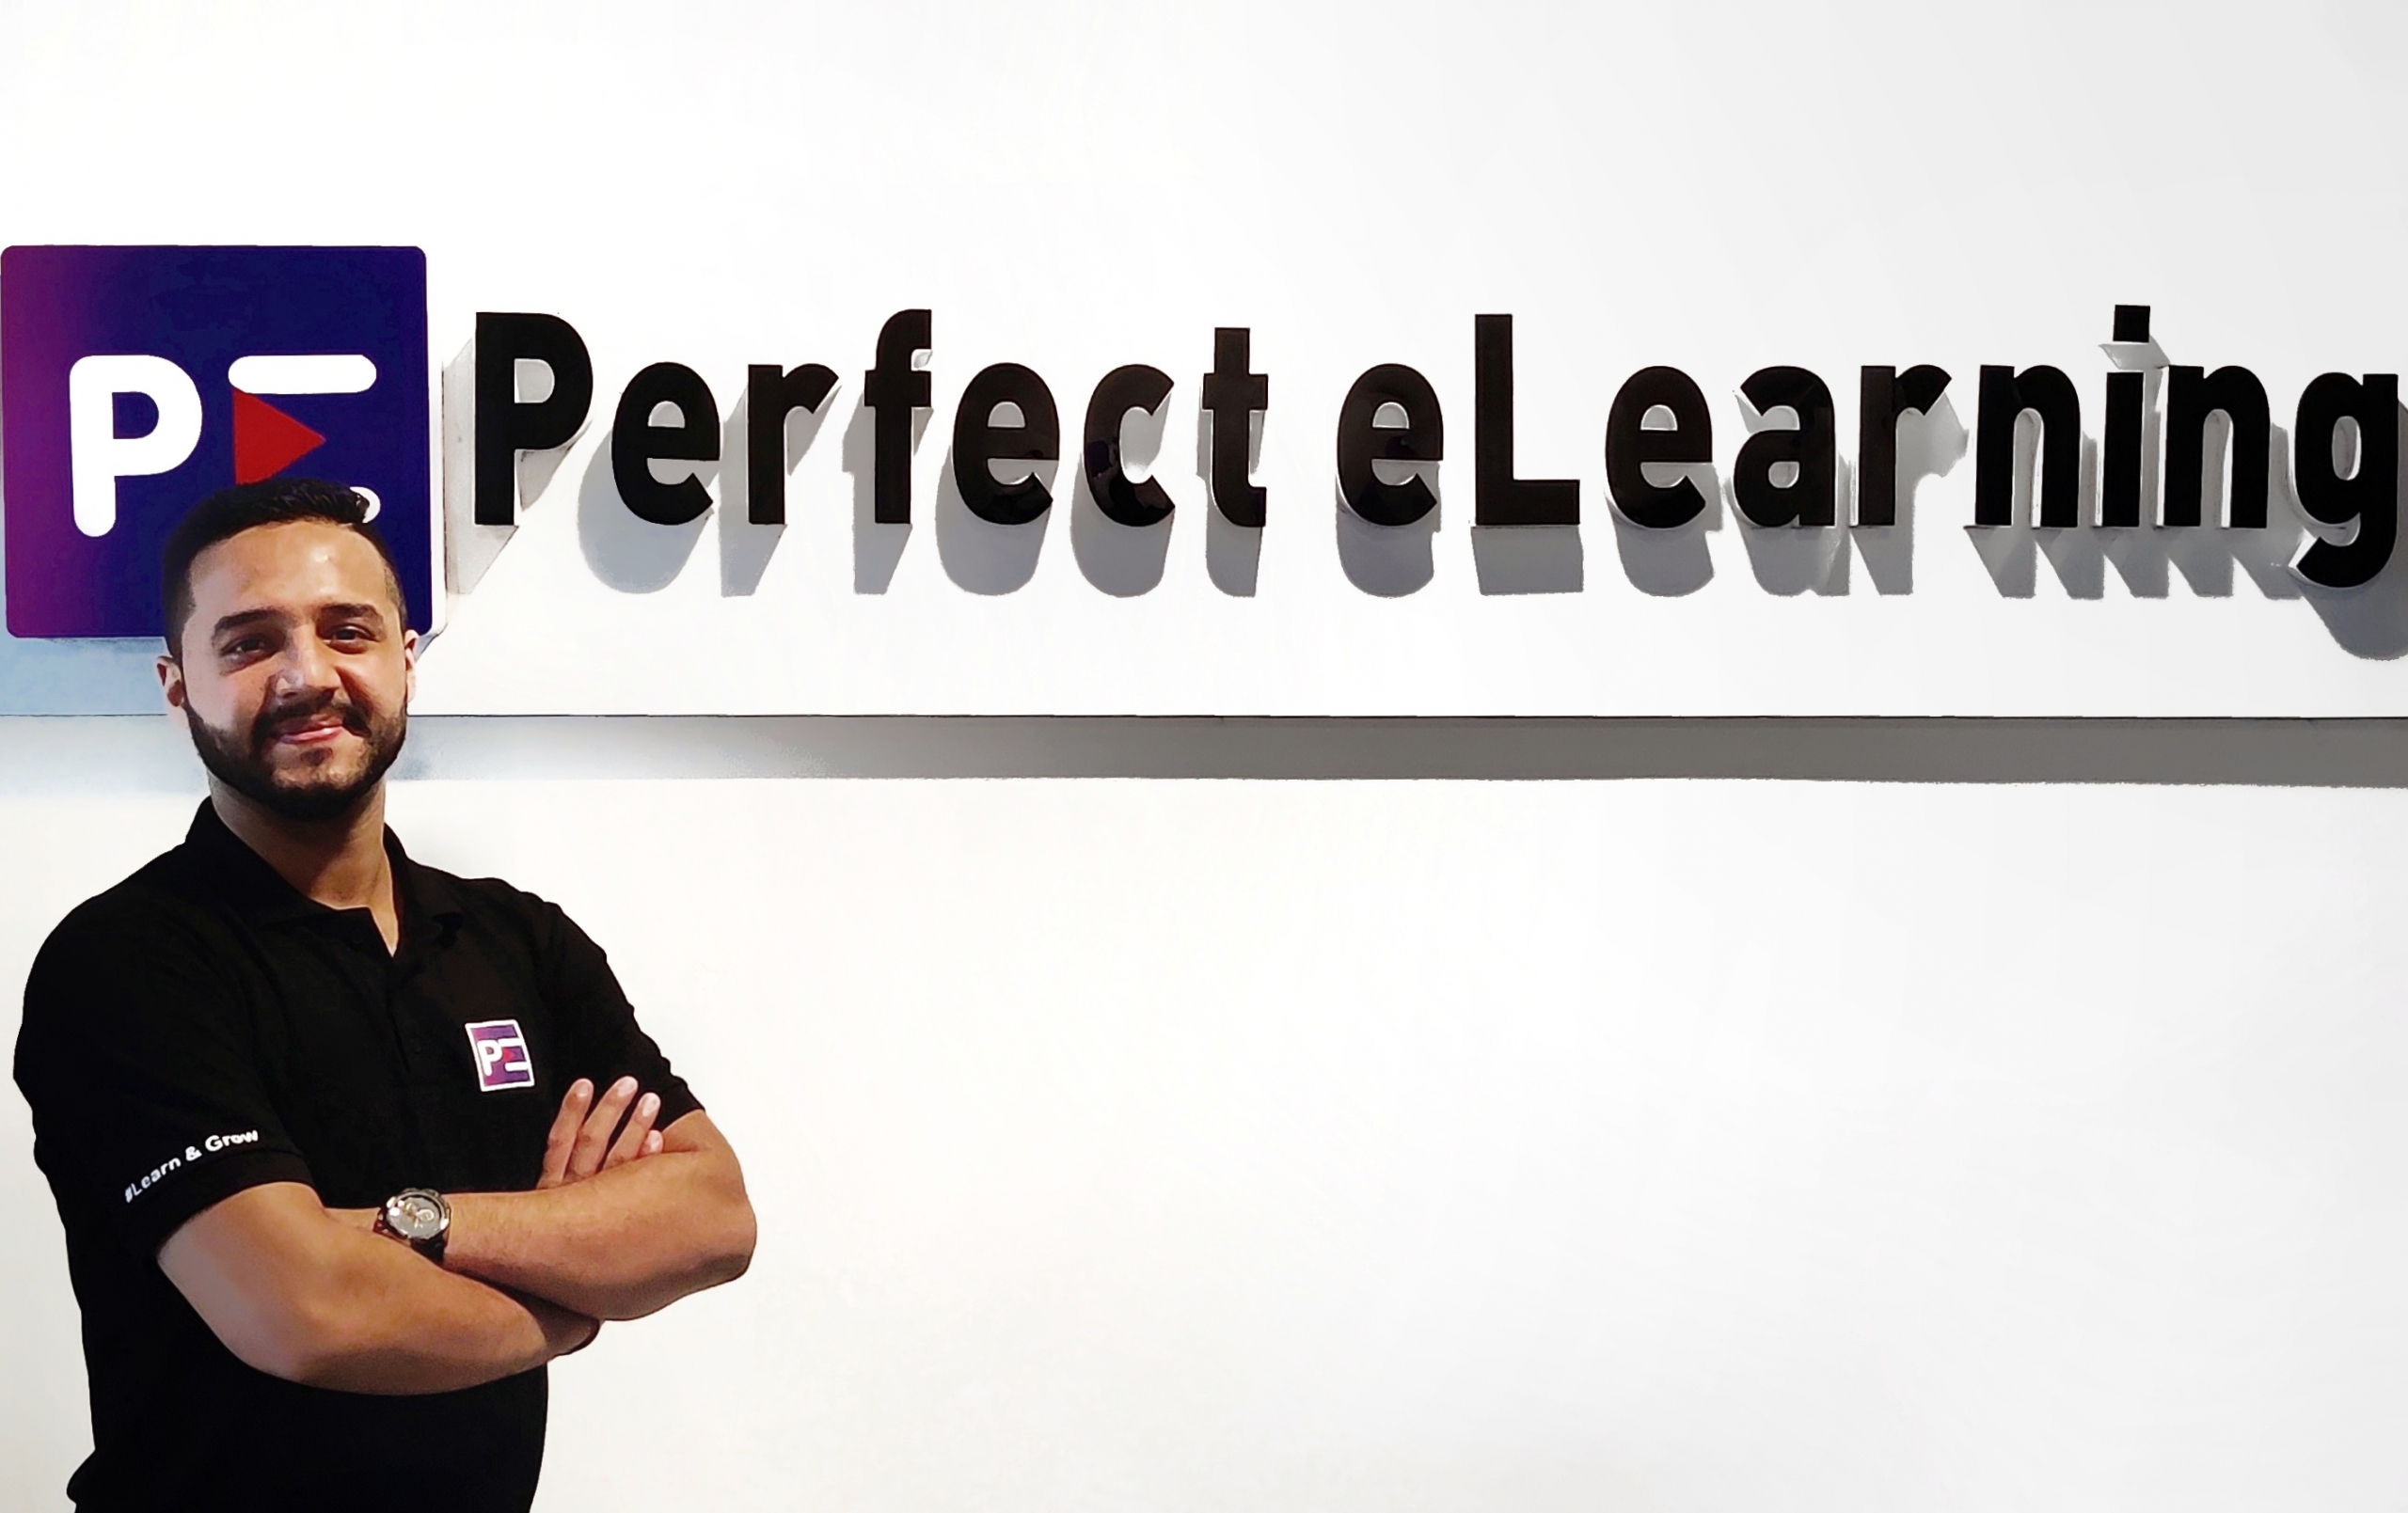 Perfect eLearning is Providing Industry Specific Education at Cost of 2 Pizzas